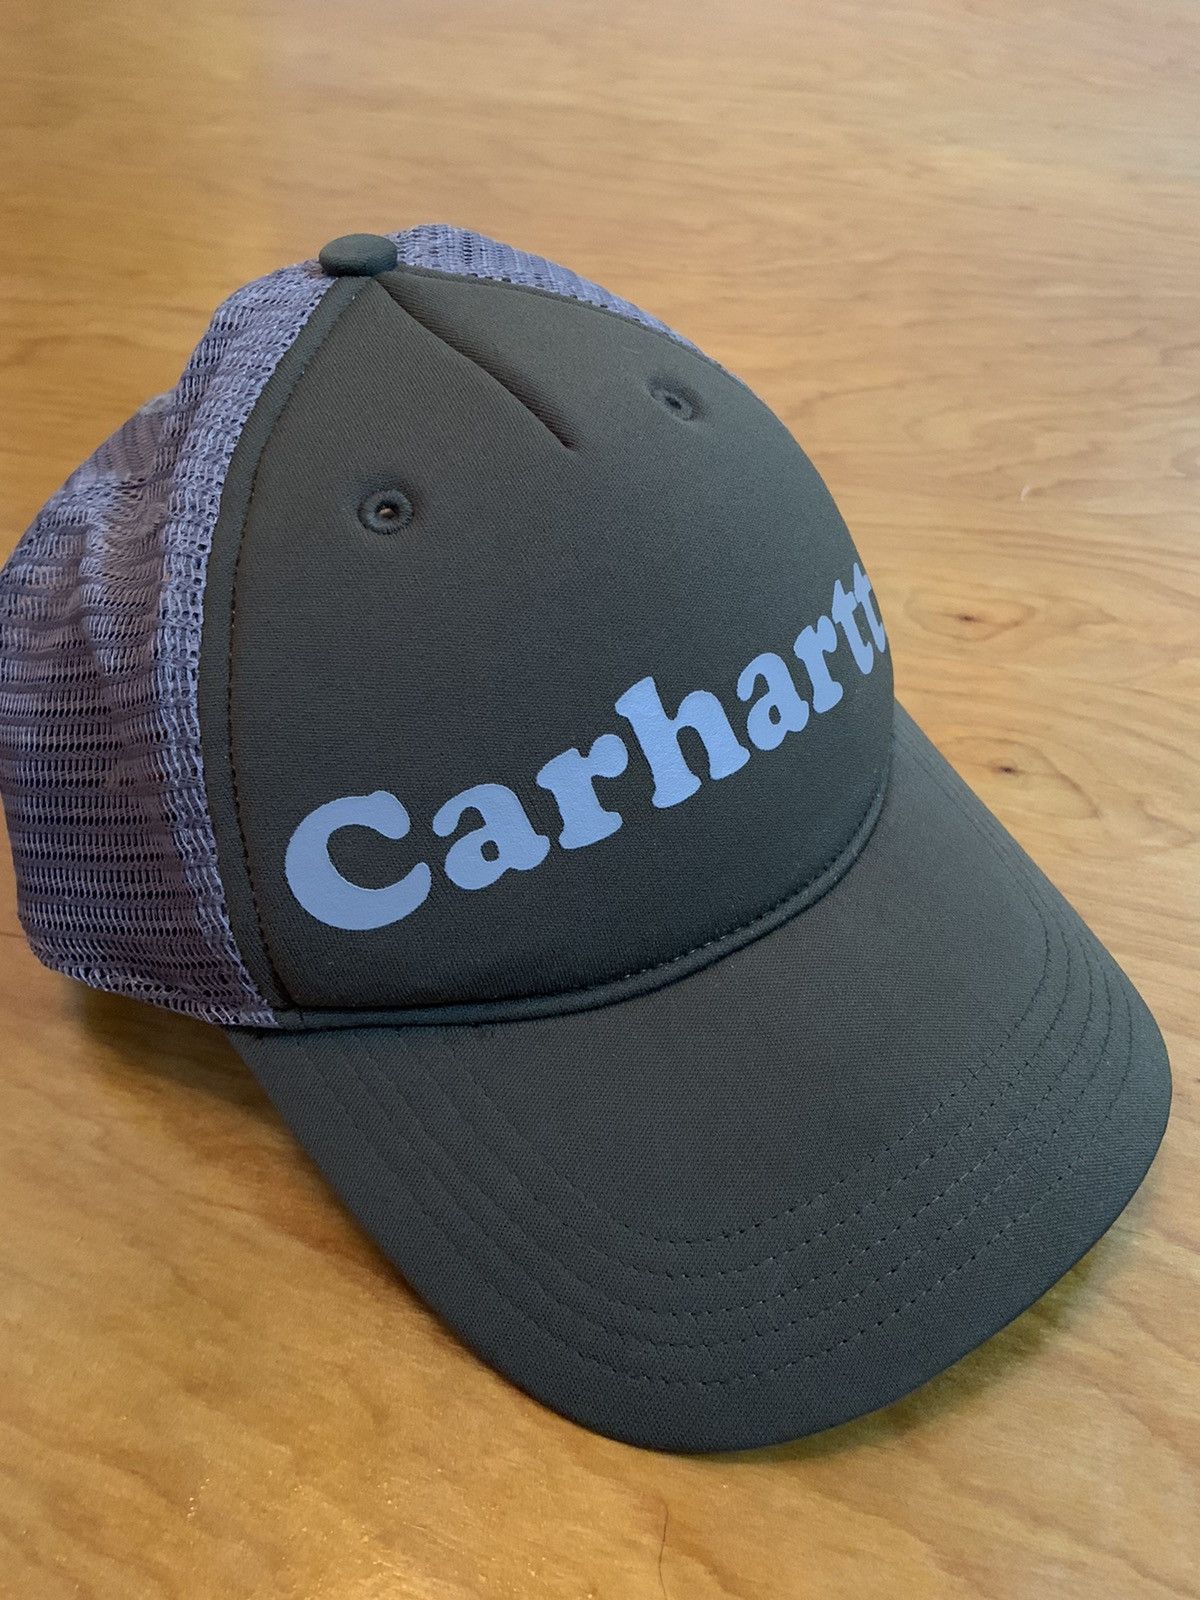 Carhartt Rare Carhartt Spell Out Trucker Hat Low Profile Size ONE SIZE - 2 Preview